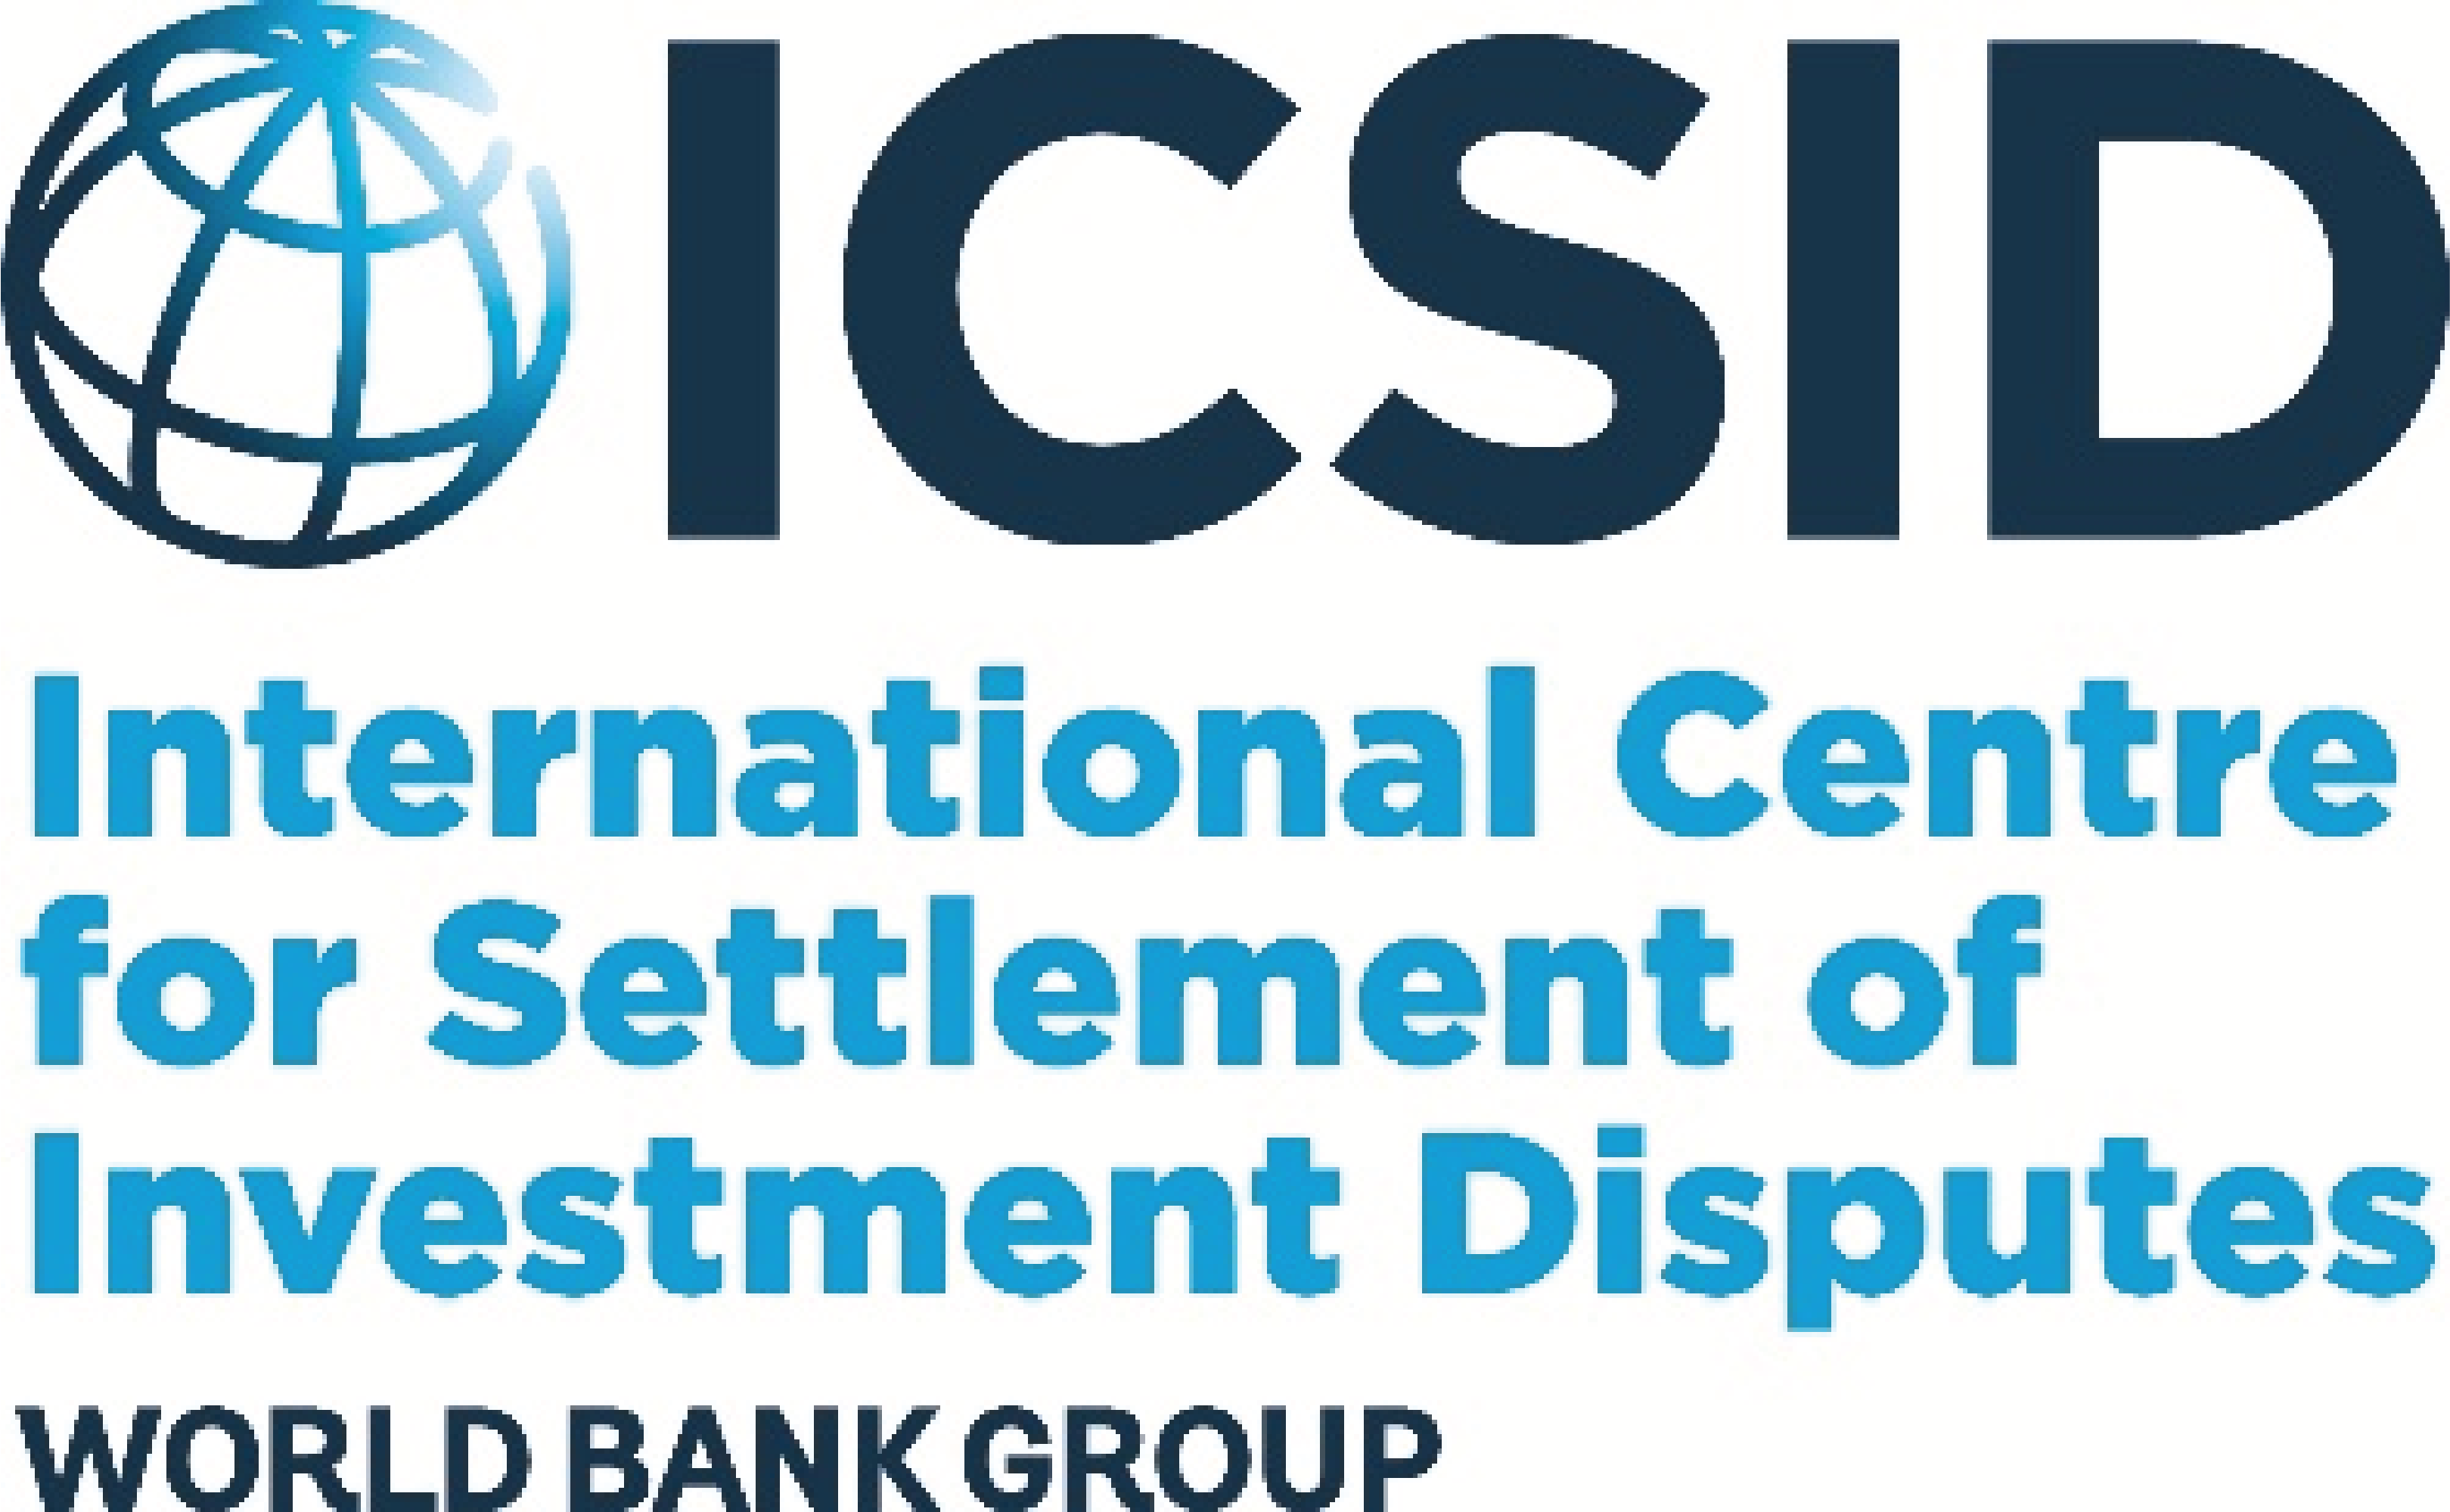 The International Centre for Settlement of Investment Disputes